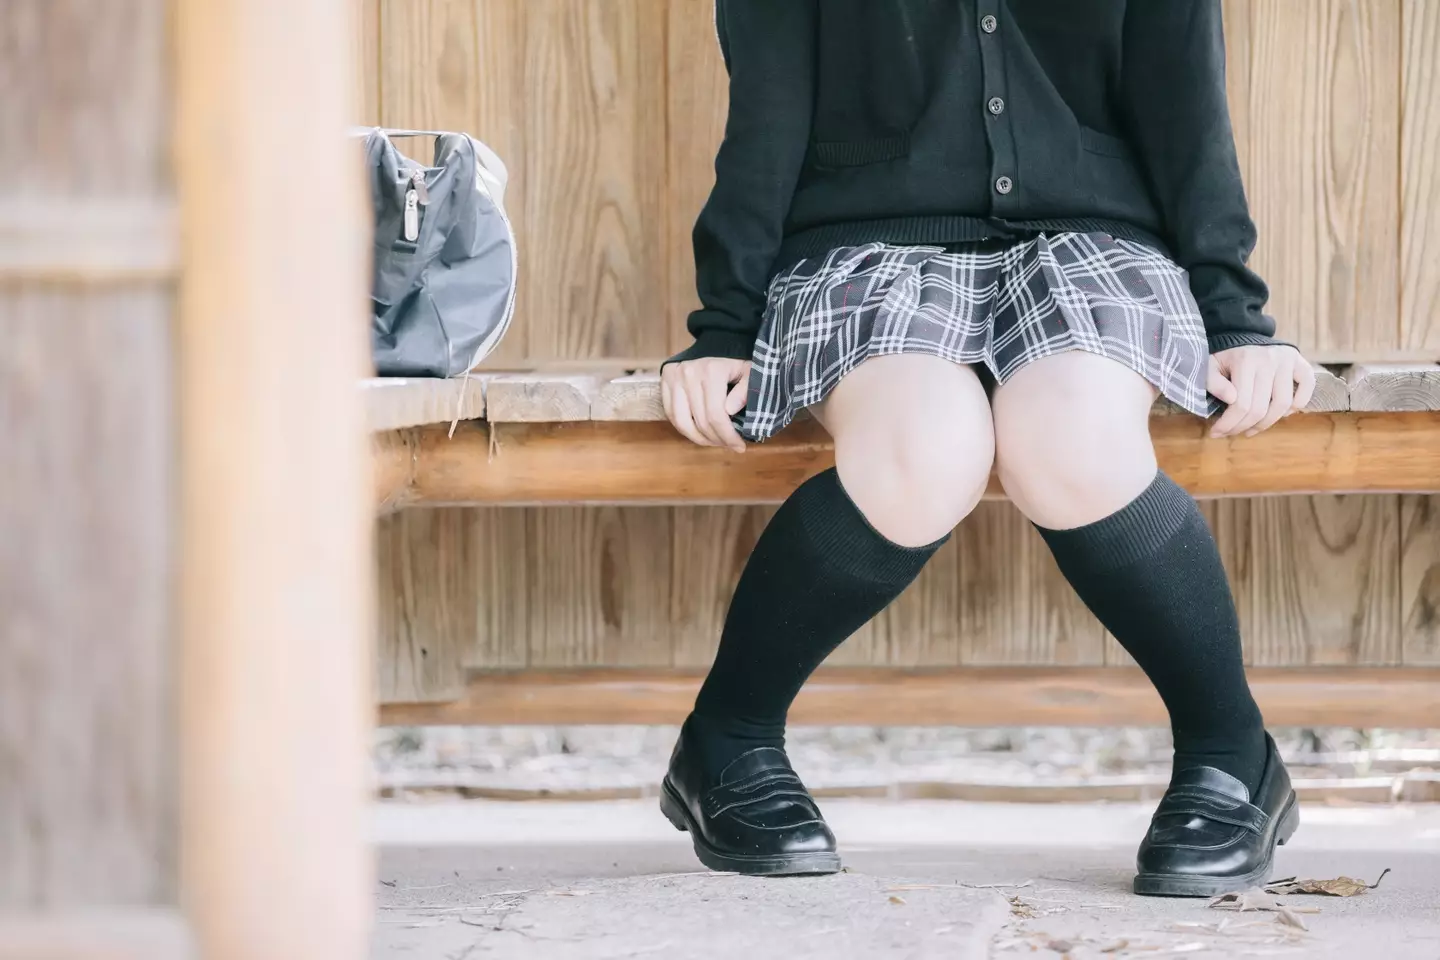 School girls were told their skirt length was to blame for up-skirting (